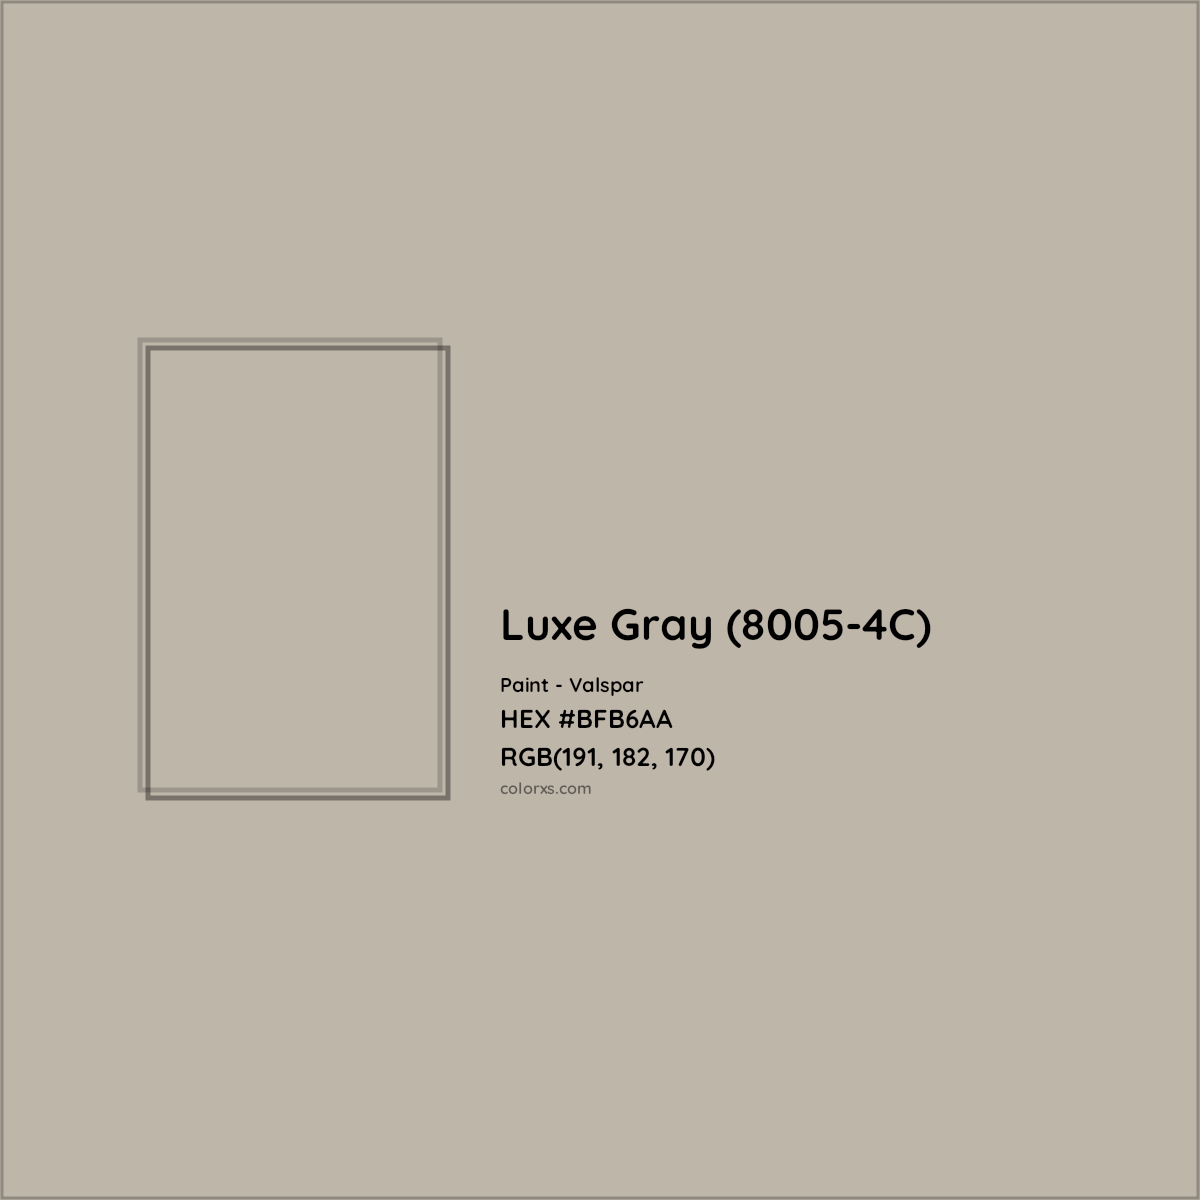 HEX #BFB6AA Luxe Gray (8005-4C) Paint Valspar - Color Code